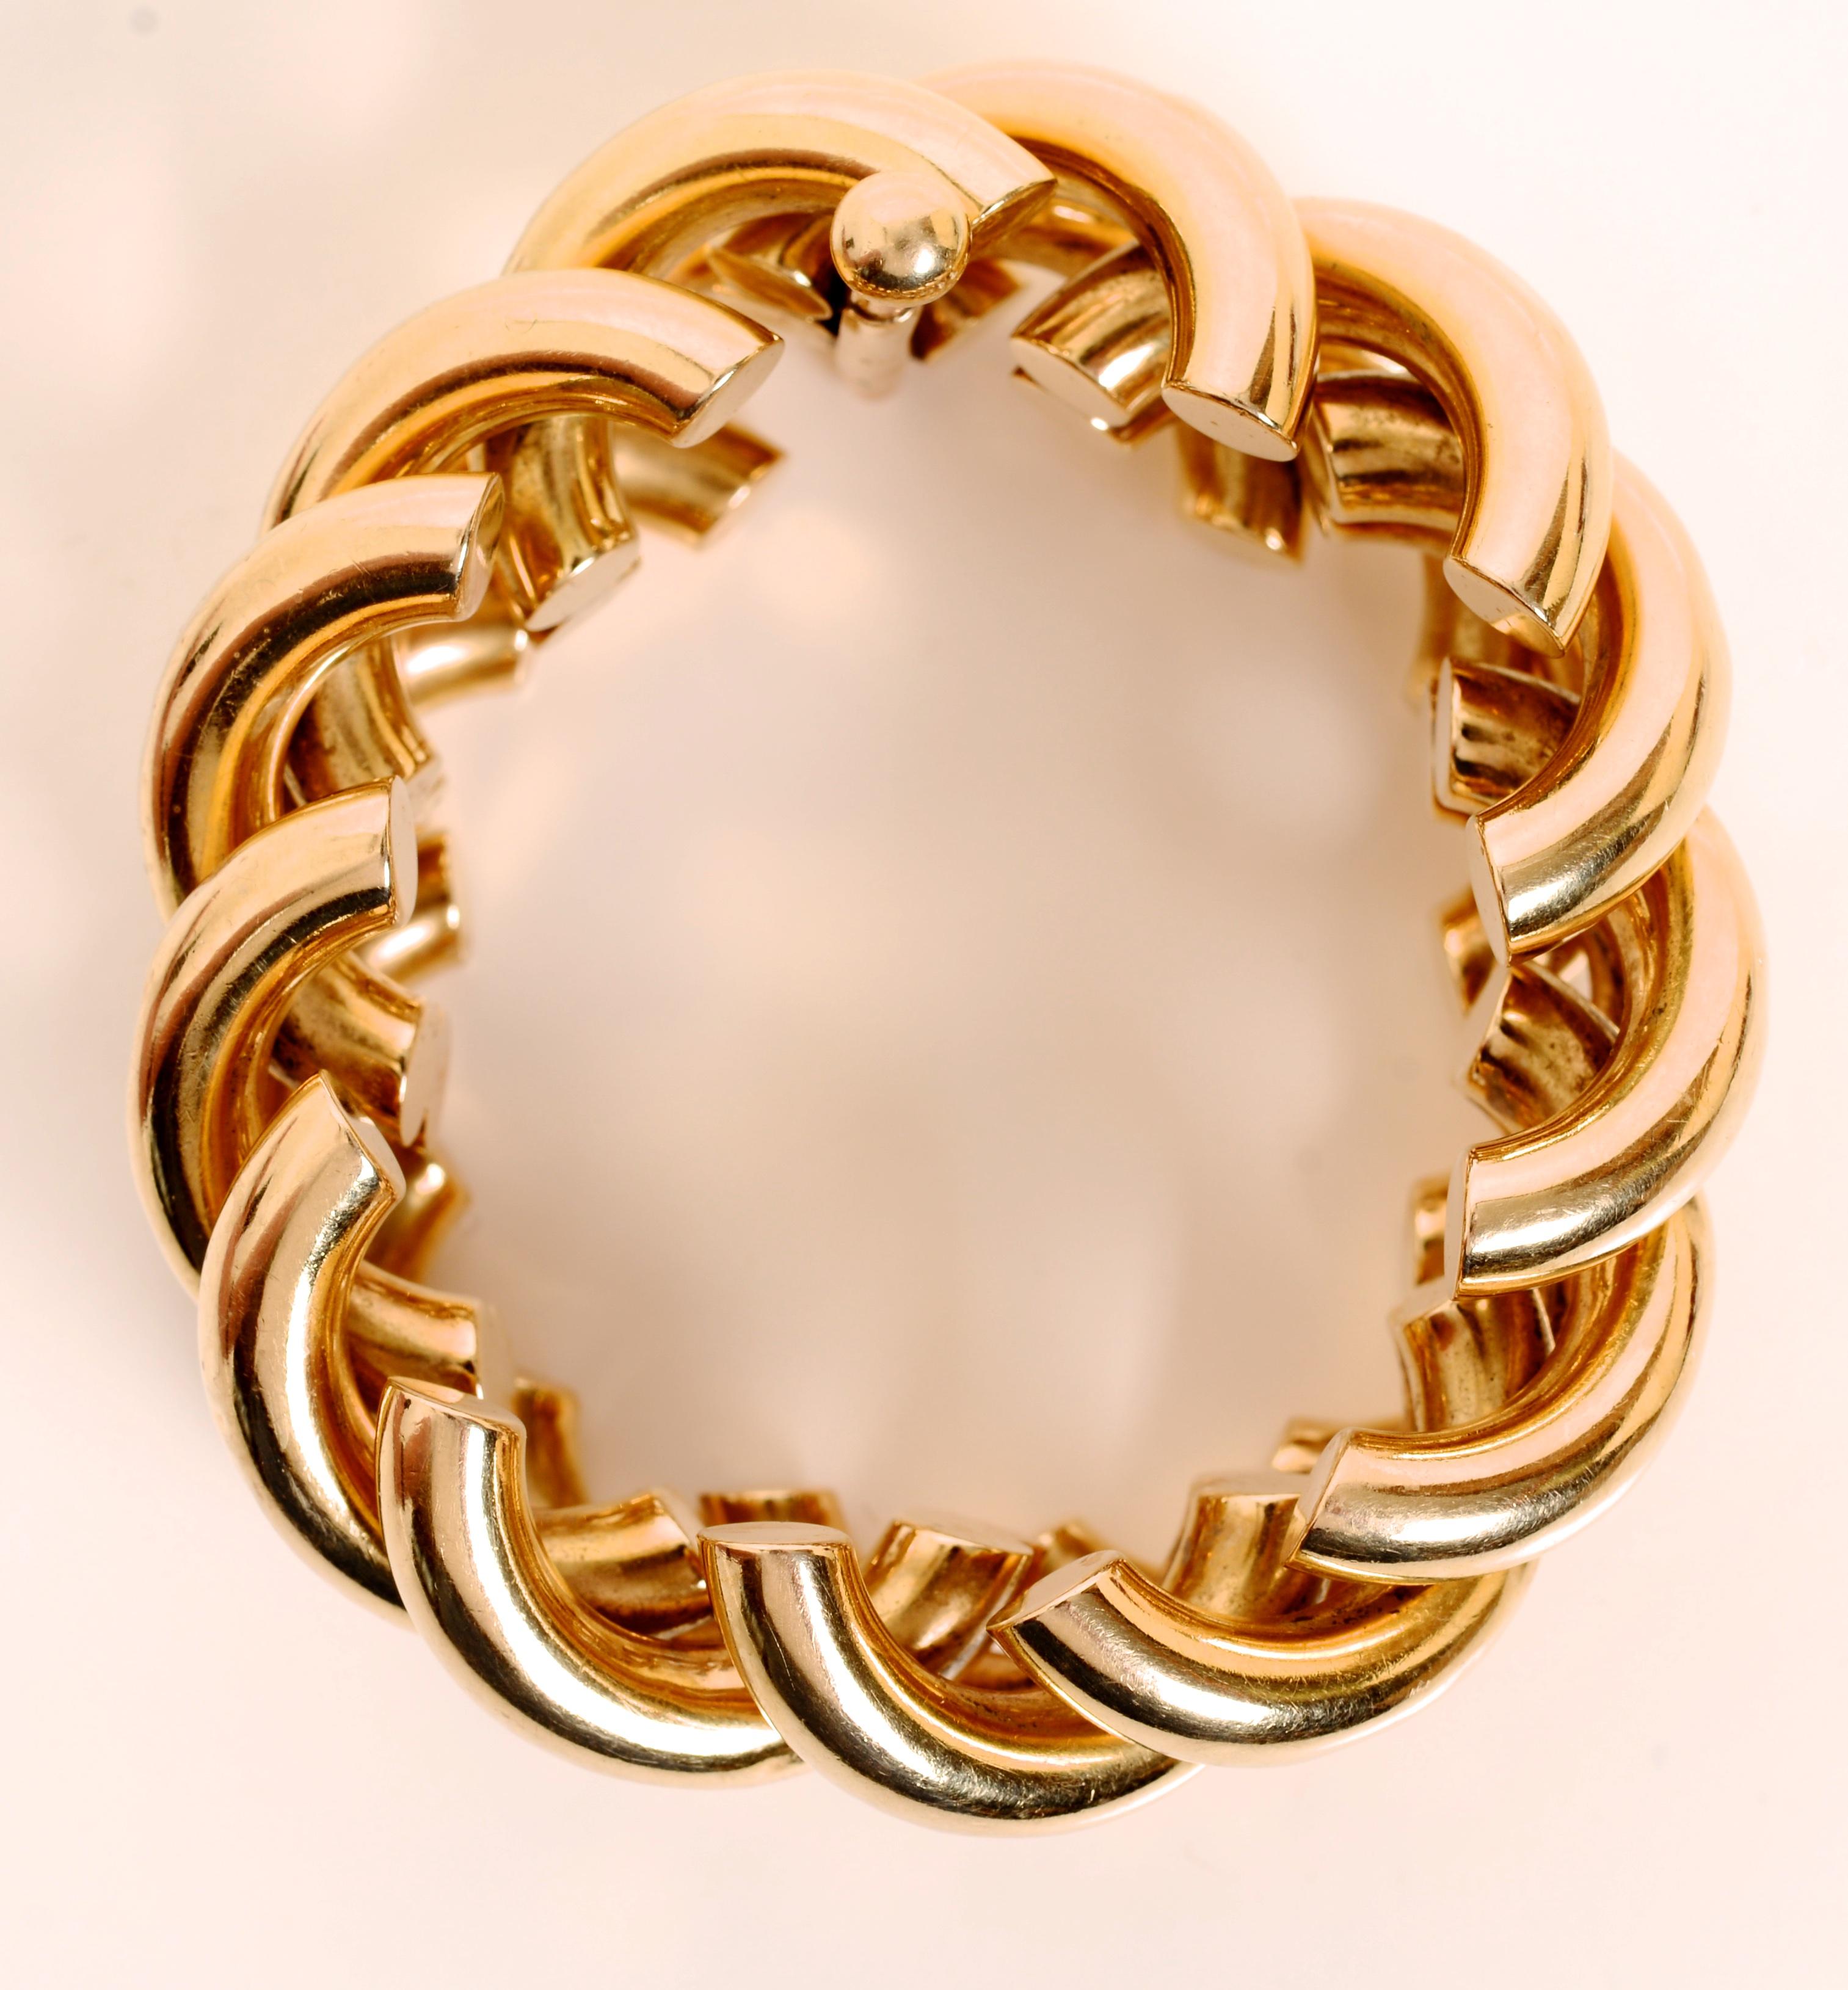 Retro 14K Gold Bracelet With Interlocking Wide Double Row Chevron Design. With 13 interlocking chevron motifs. A classic, elegant, bold statement from the 1940's finely articulated making it comfortable to wear. 8550